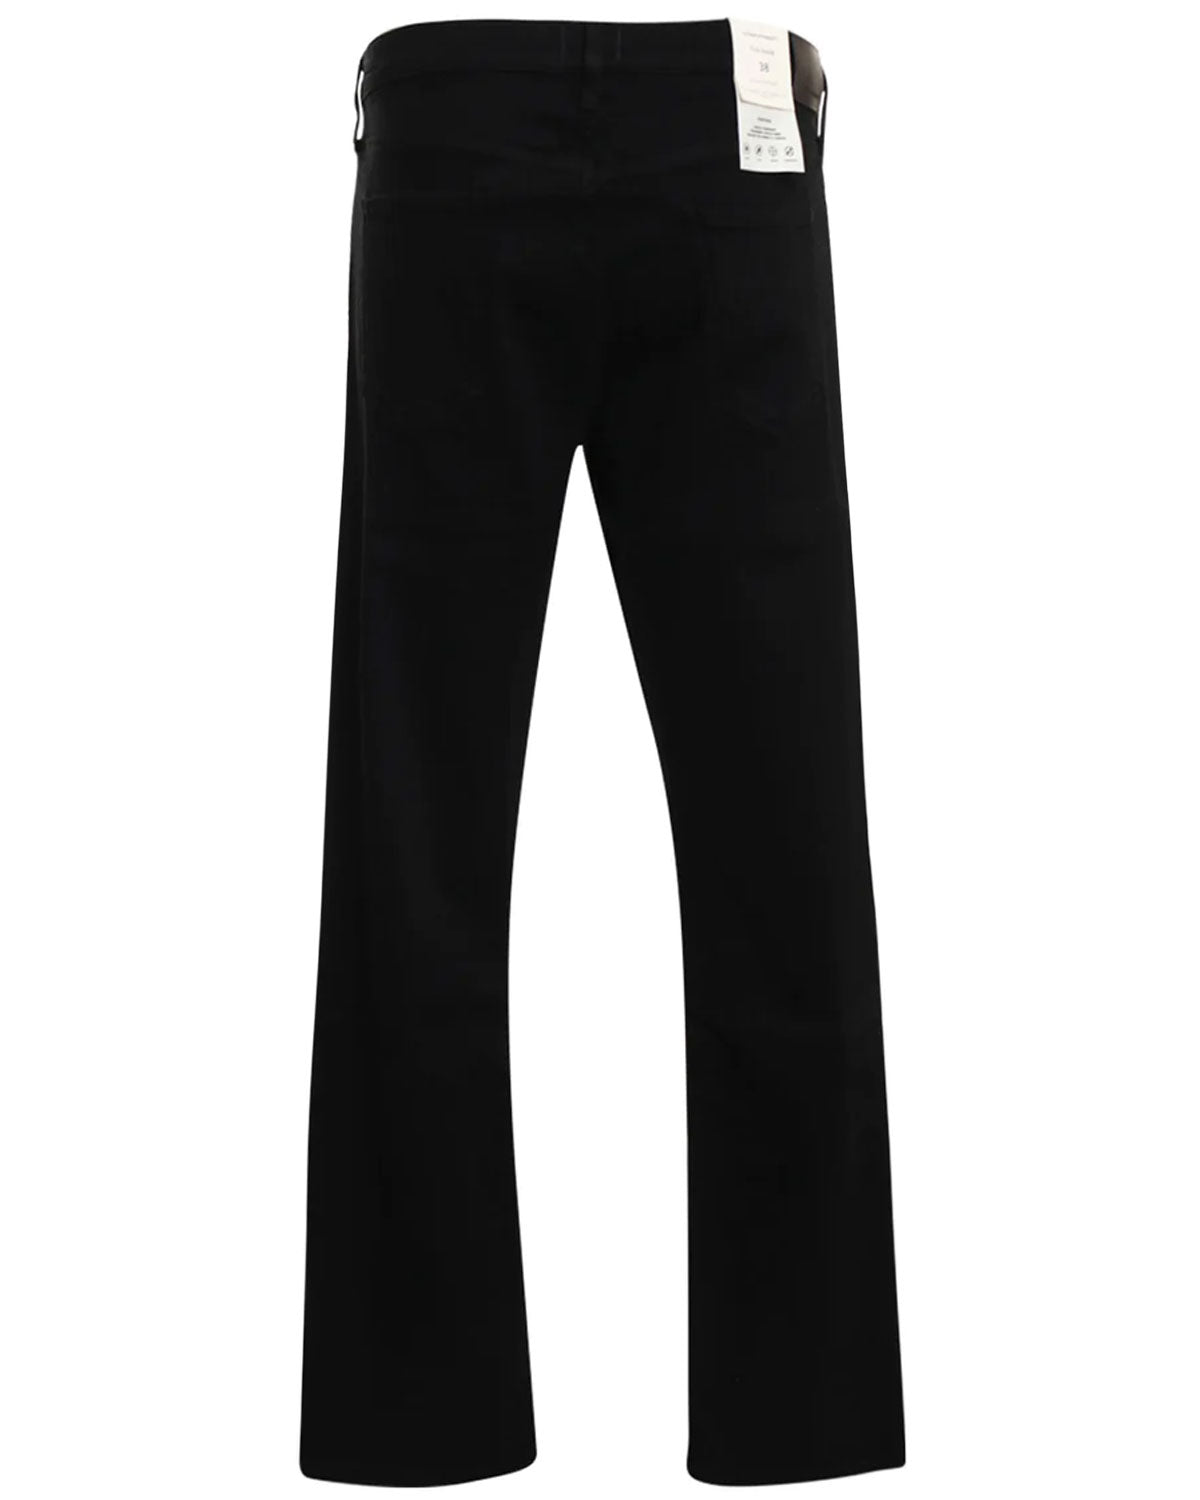 Gage Classic Straight Perform Denim Pant in Raven